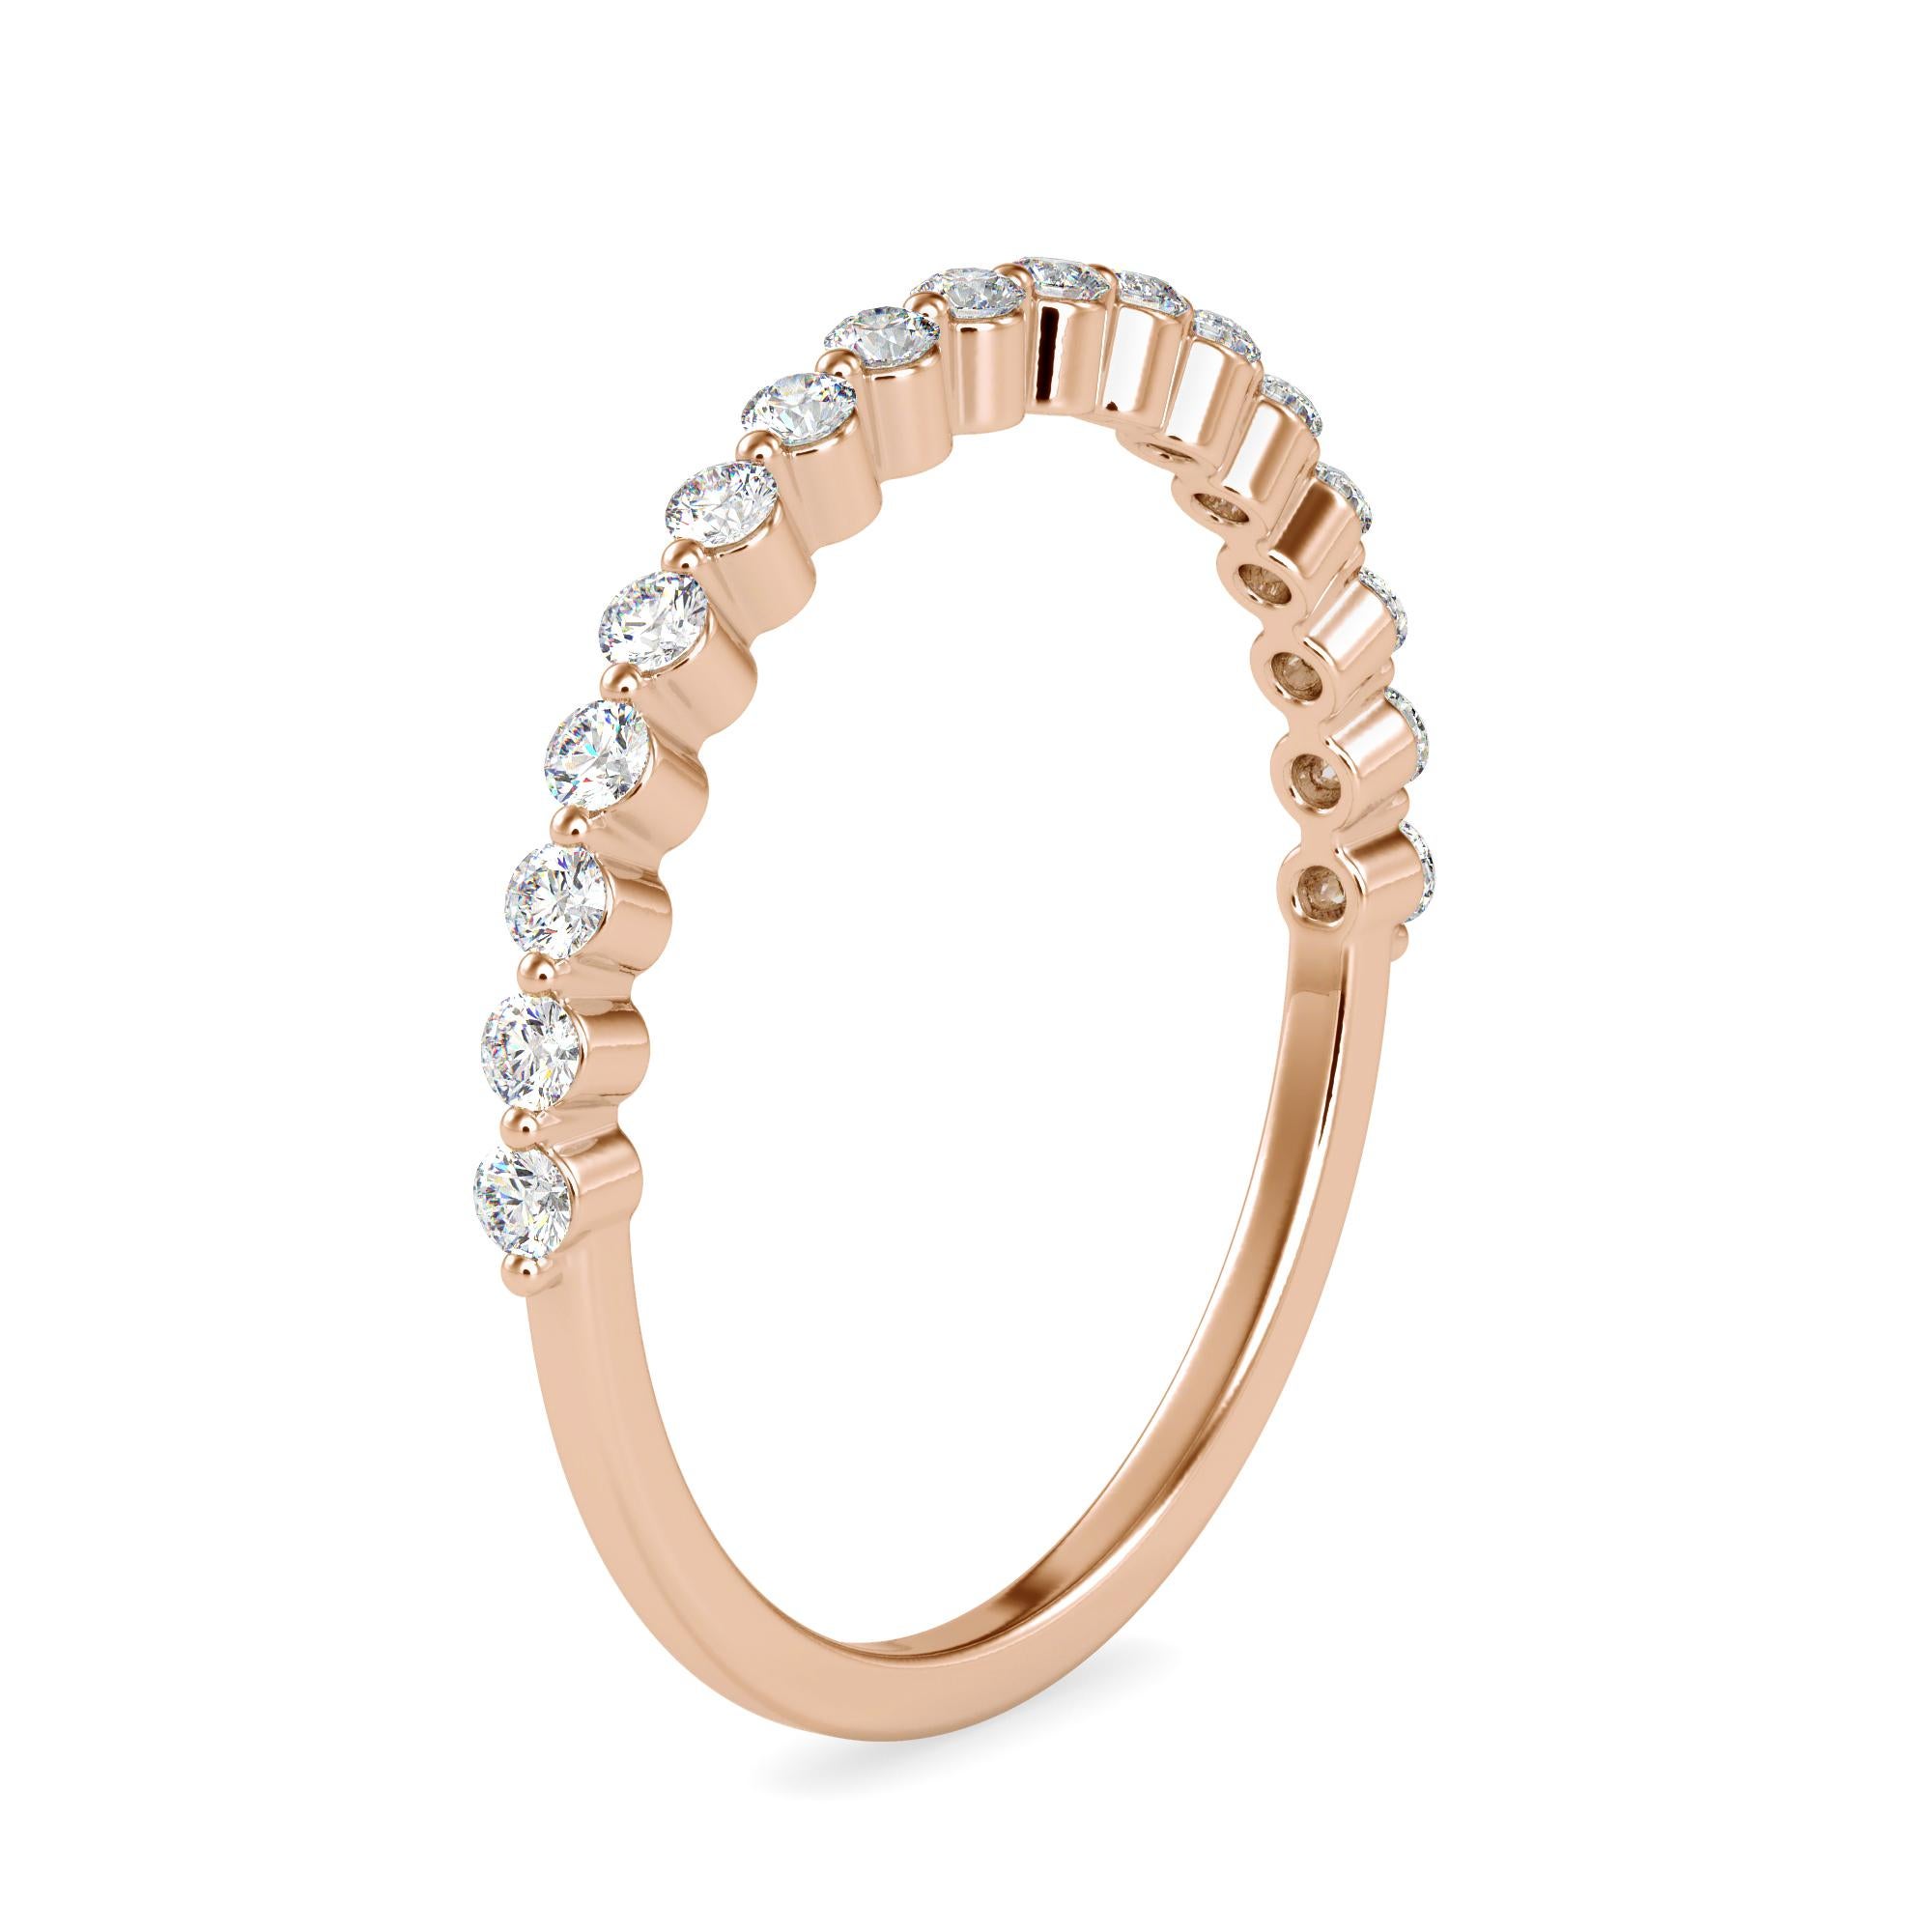 0.26 Carat Diamond 14K Rose Gold Ring In New Condition For Sale In Los Angeles, CA